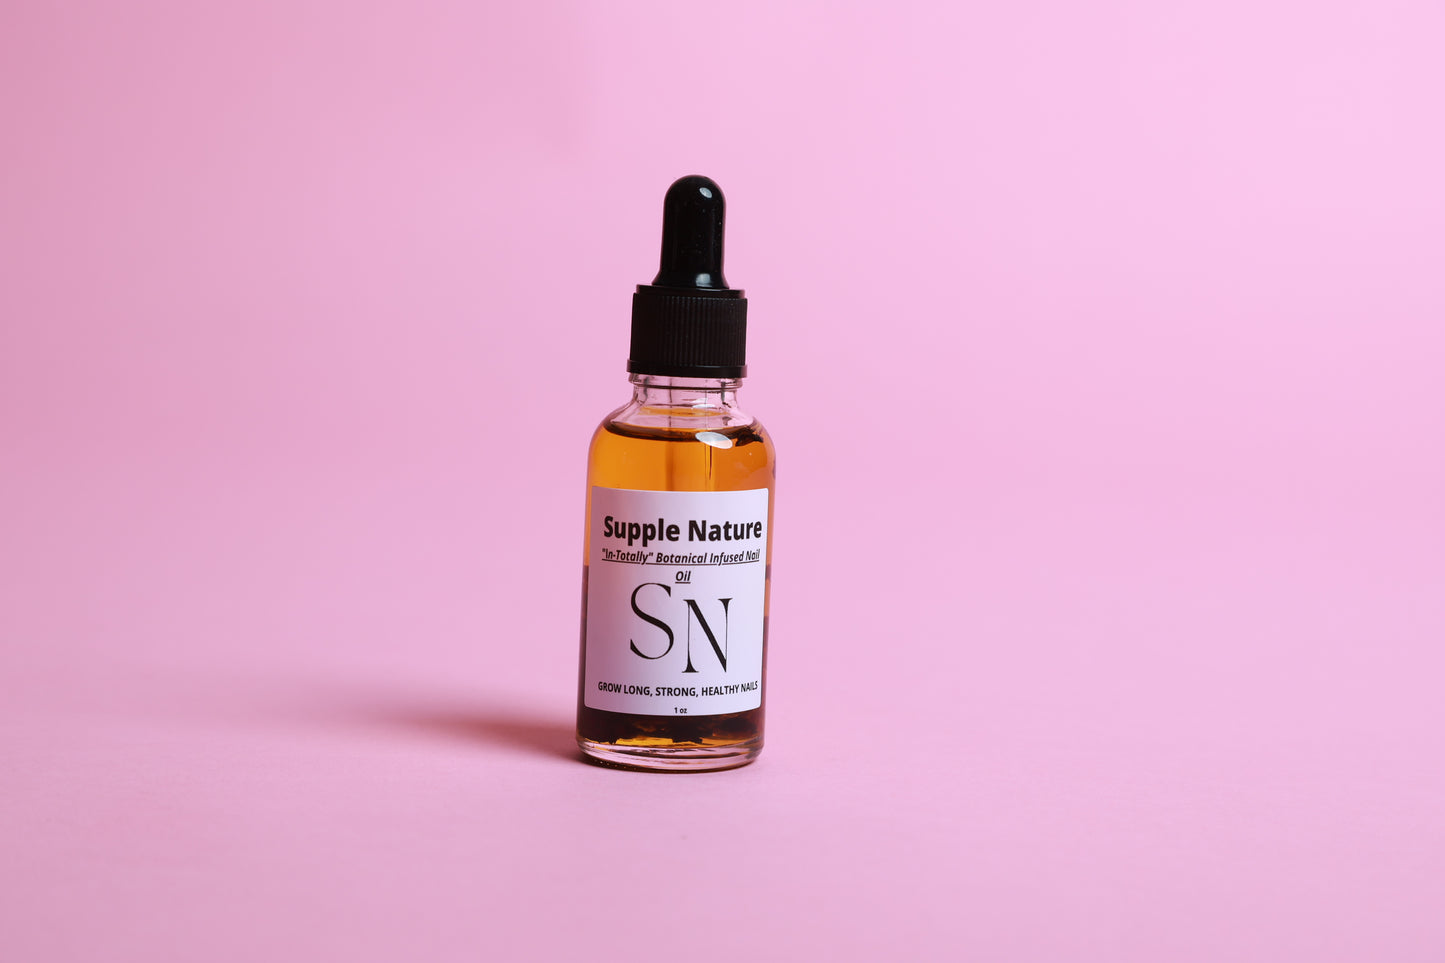 "In Totally" - Botanical Infused Nail Oil